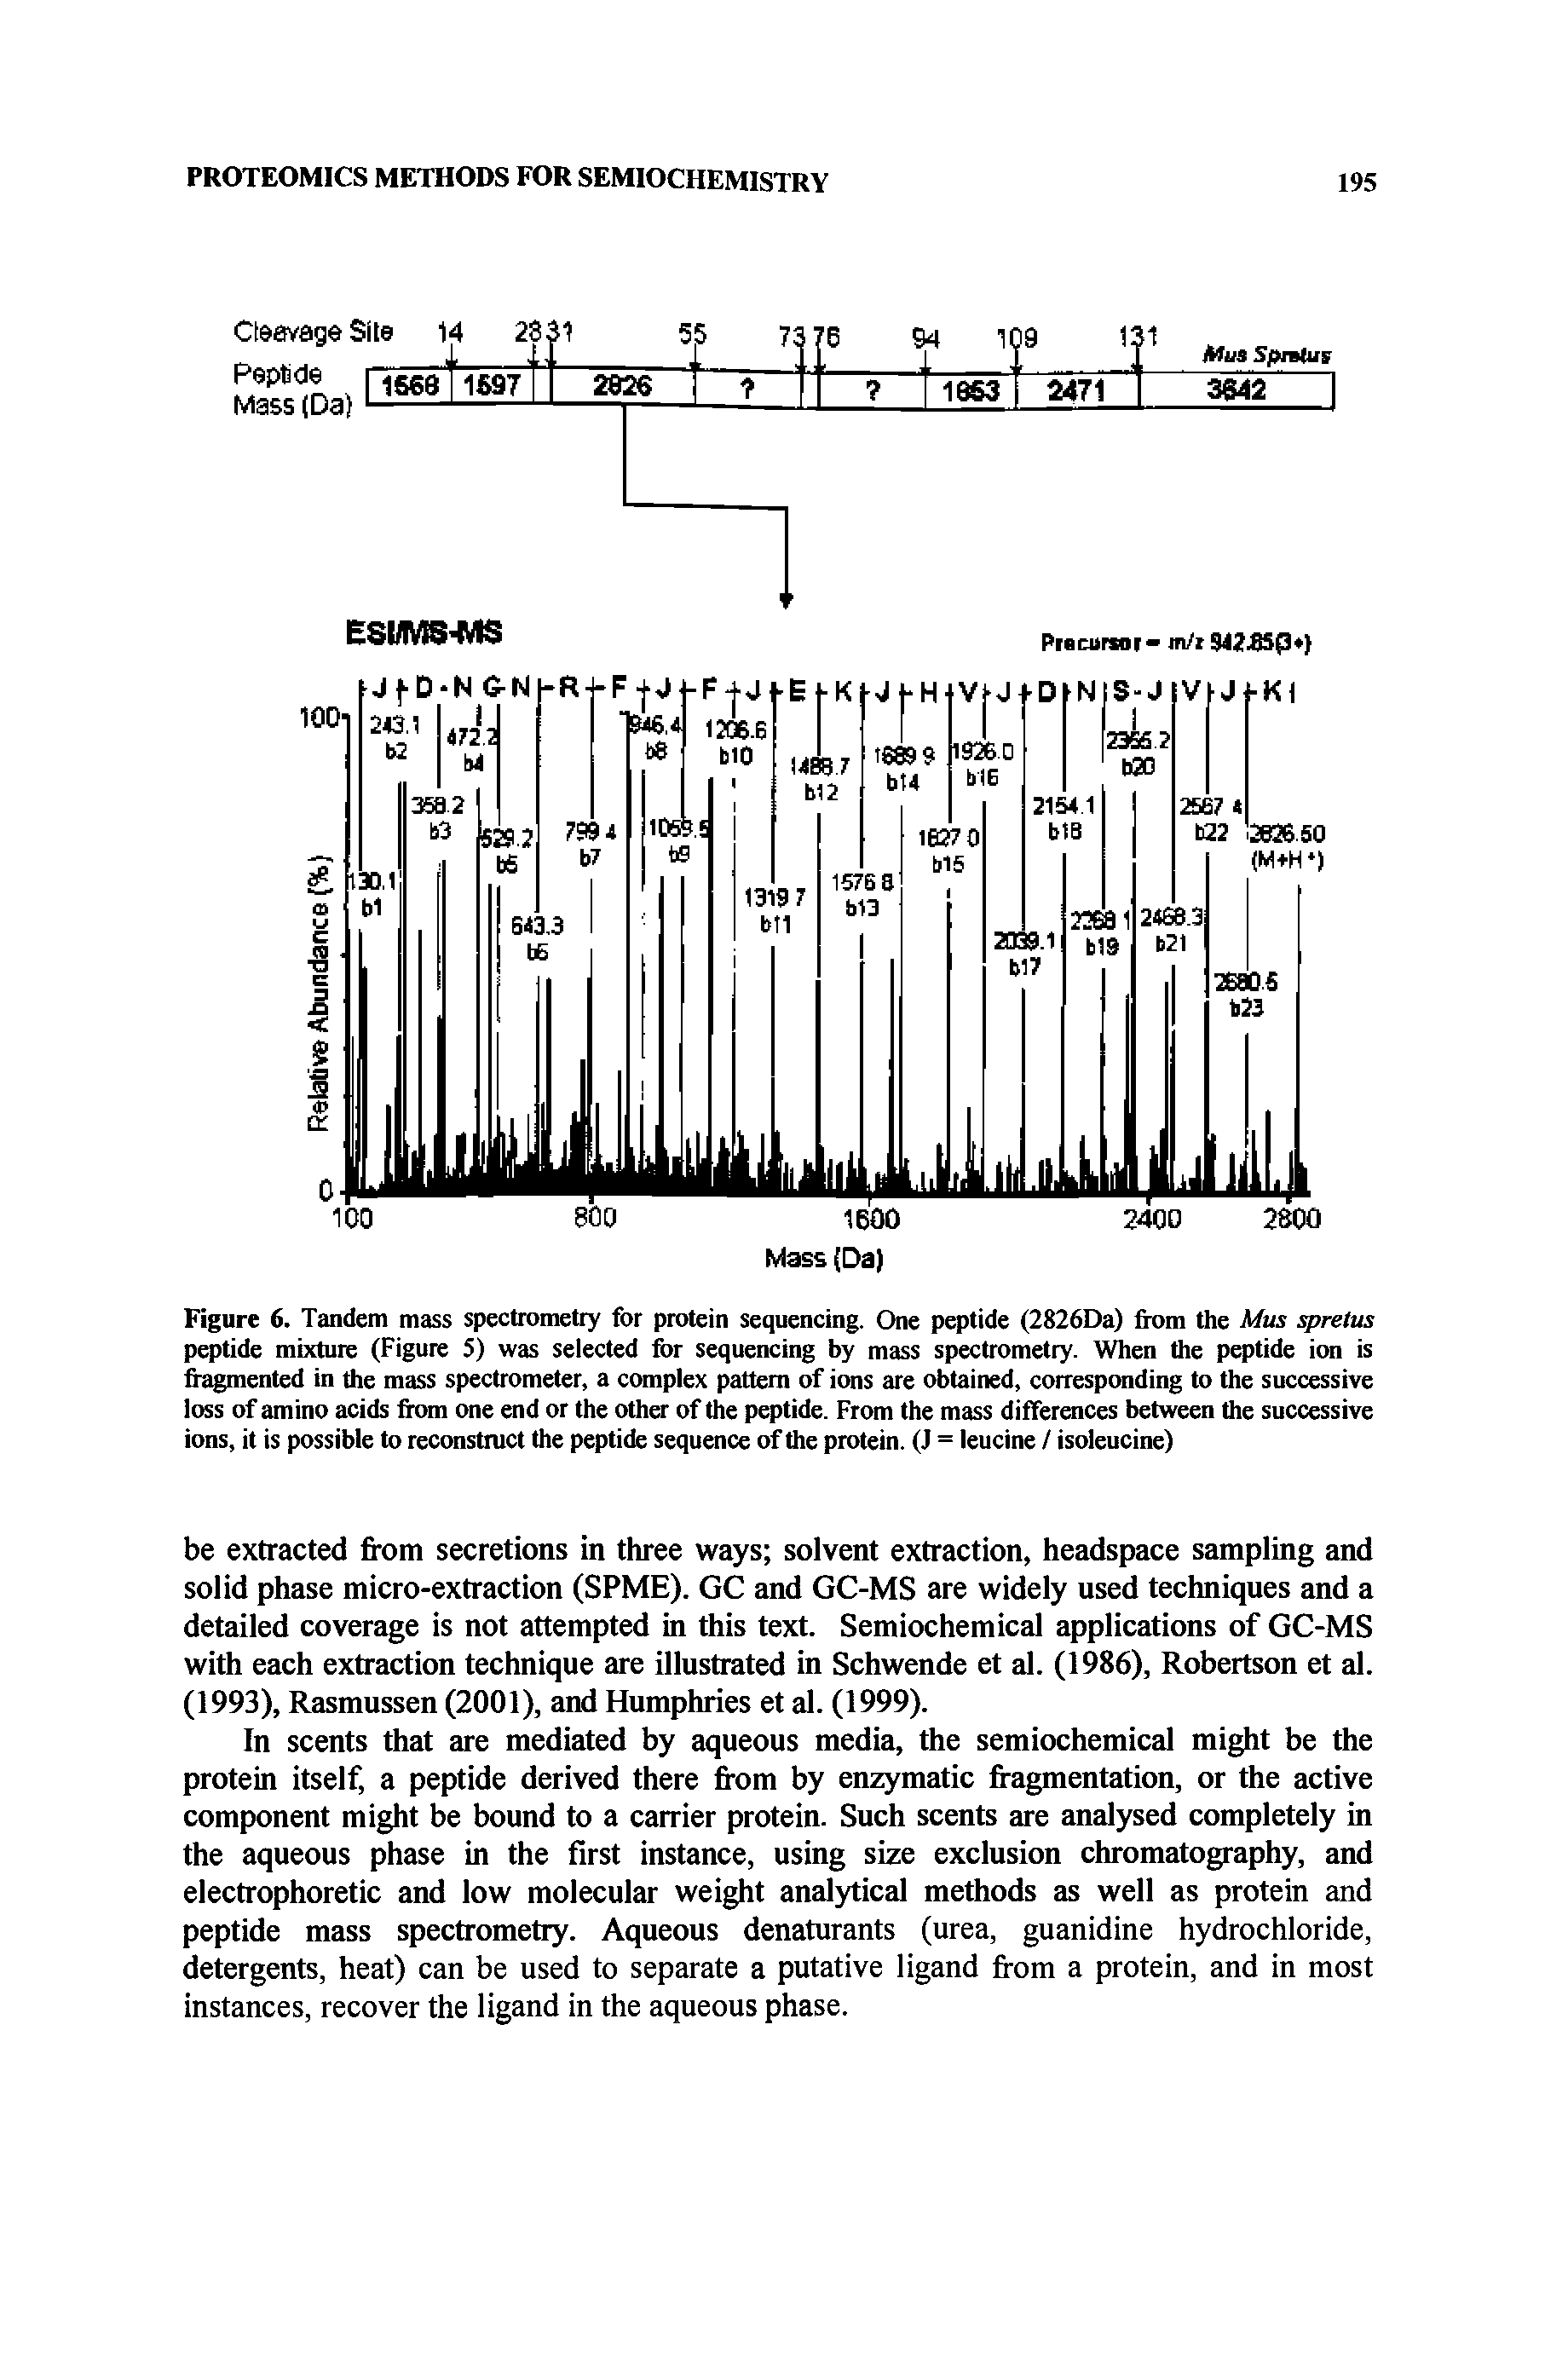 Figure 6. Tandem mass spectrometry for protein sequencing. One peptide (2826Da) from the Mus spretus peptide mixture (Figure 5) was selected for sequencing by mass spectrometry. When the peptide ion is fi mented in the mass spectrometer, a complex pattern of ions are obtained, corresponding to the successive loss of amino acids from one end or the other of the peptide. From the mass differences between the successive ions, it is possible to reconstruct the peptide sequence of the protein. (J = leucine / isoleucine)...